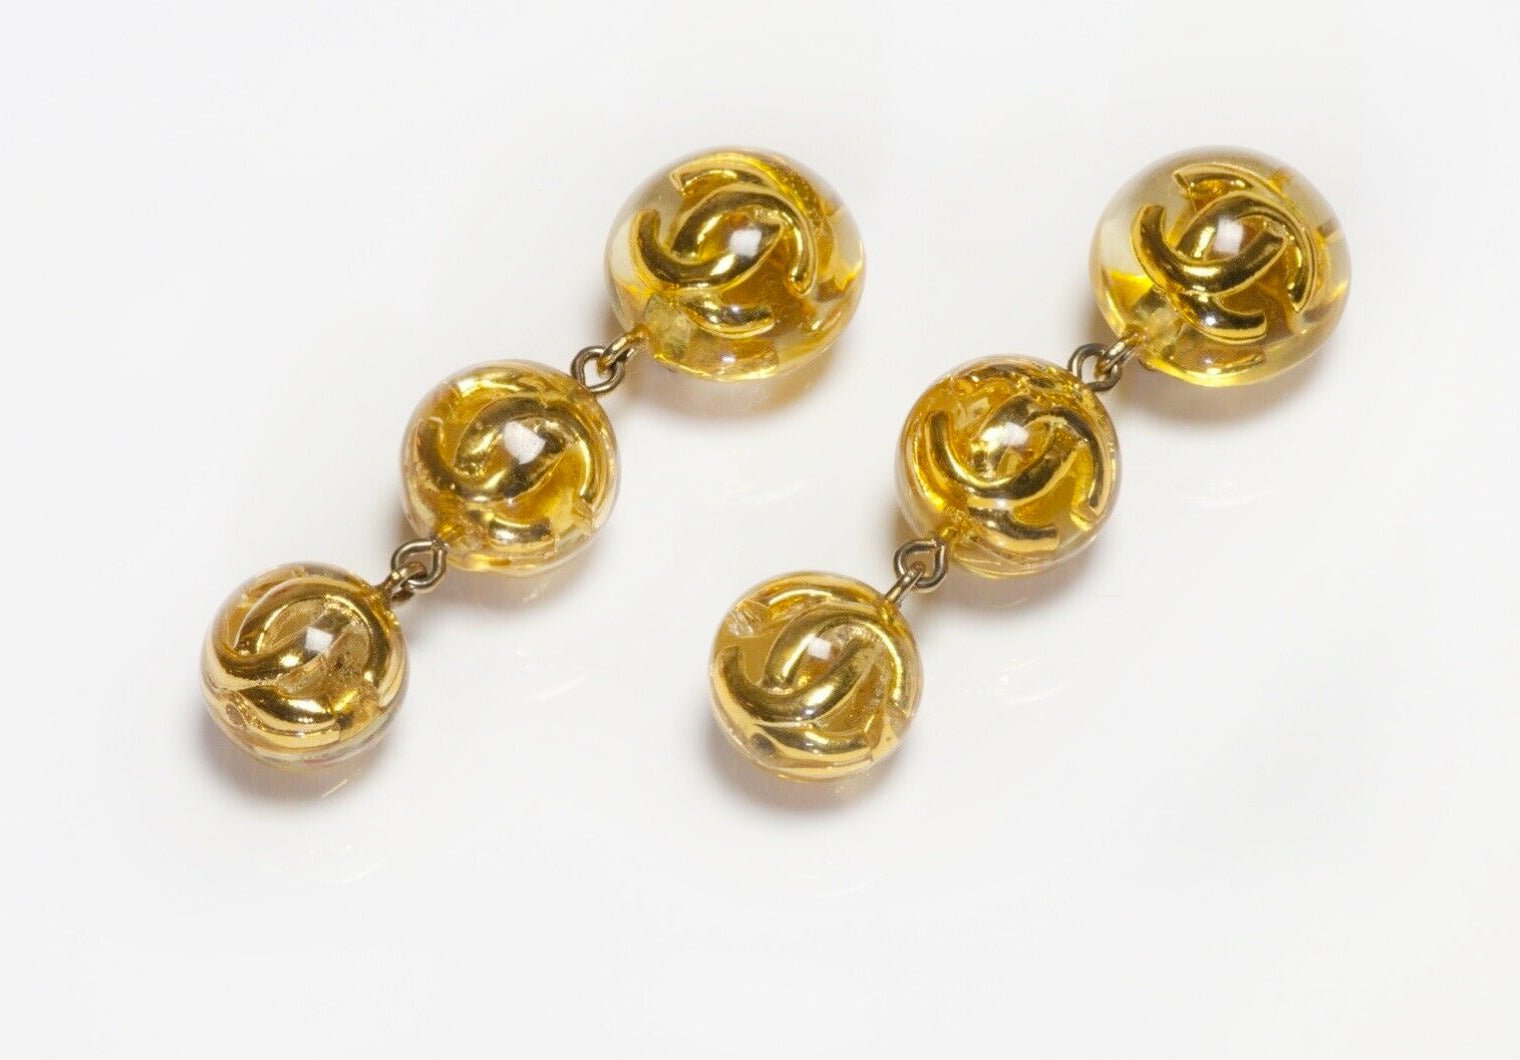 CHANEL Paris 1990’s Long CC Yellow Lucite Ball Drop Earrings - DSF Antique Jewelry